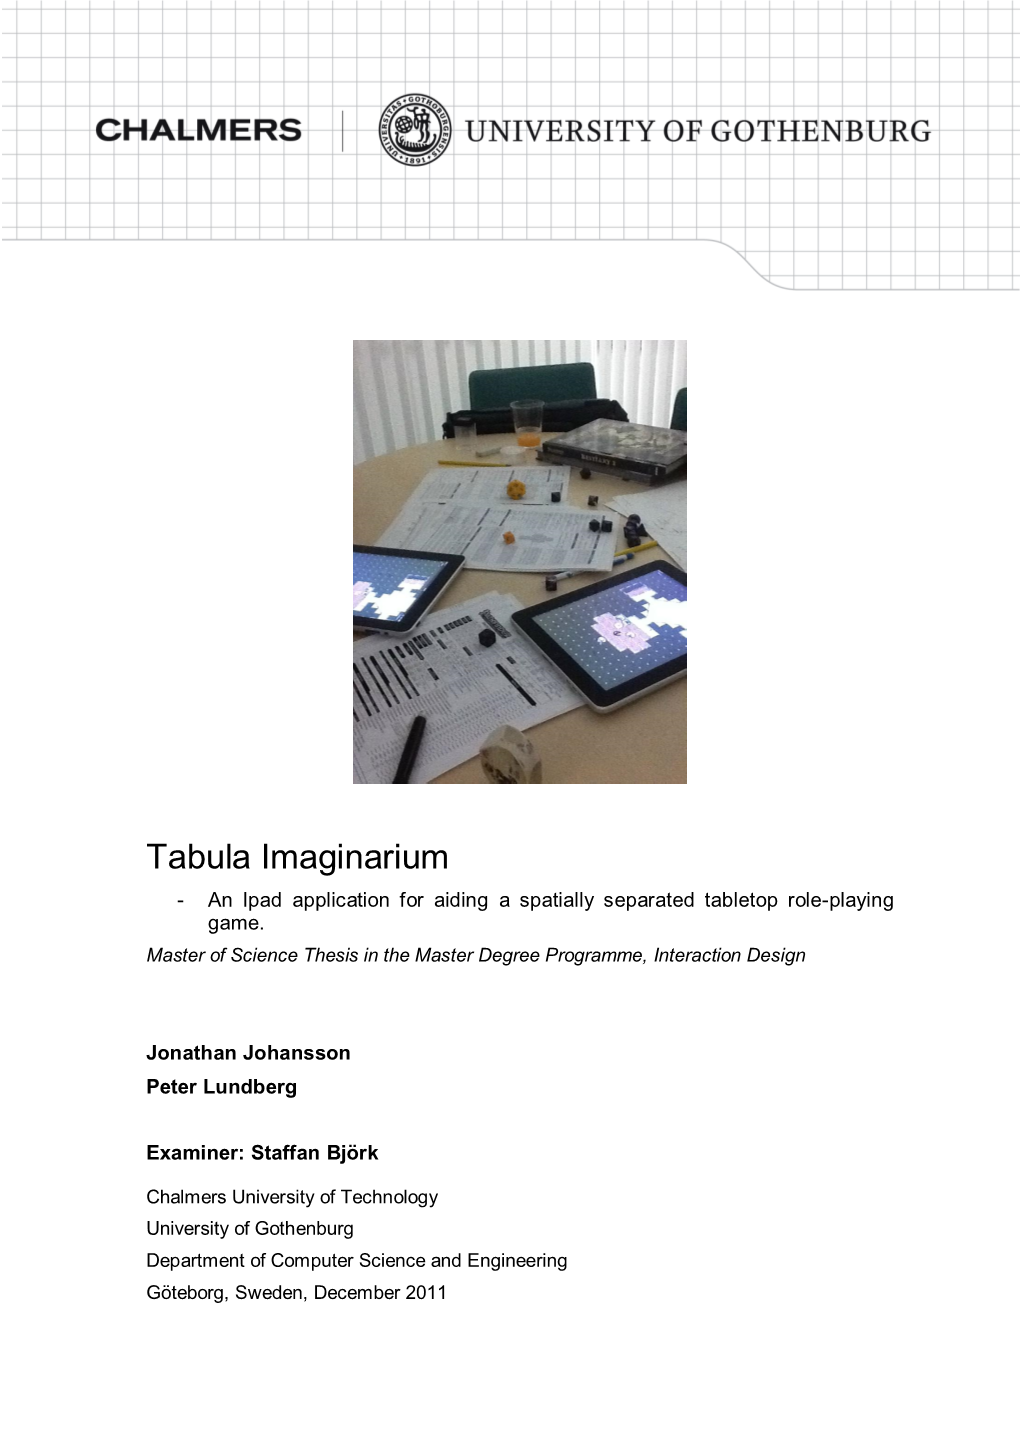 Tabula Imaginarium - an Ipad Application for Aiding a Spatially Separated Tabletop Role-Playing Game